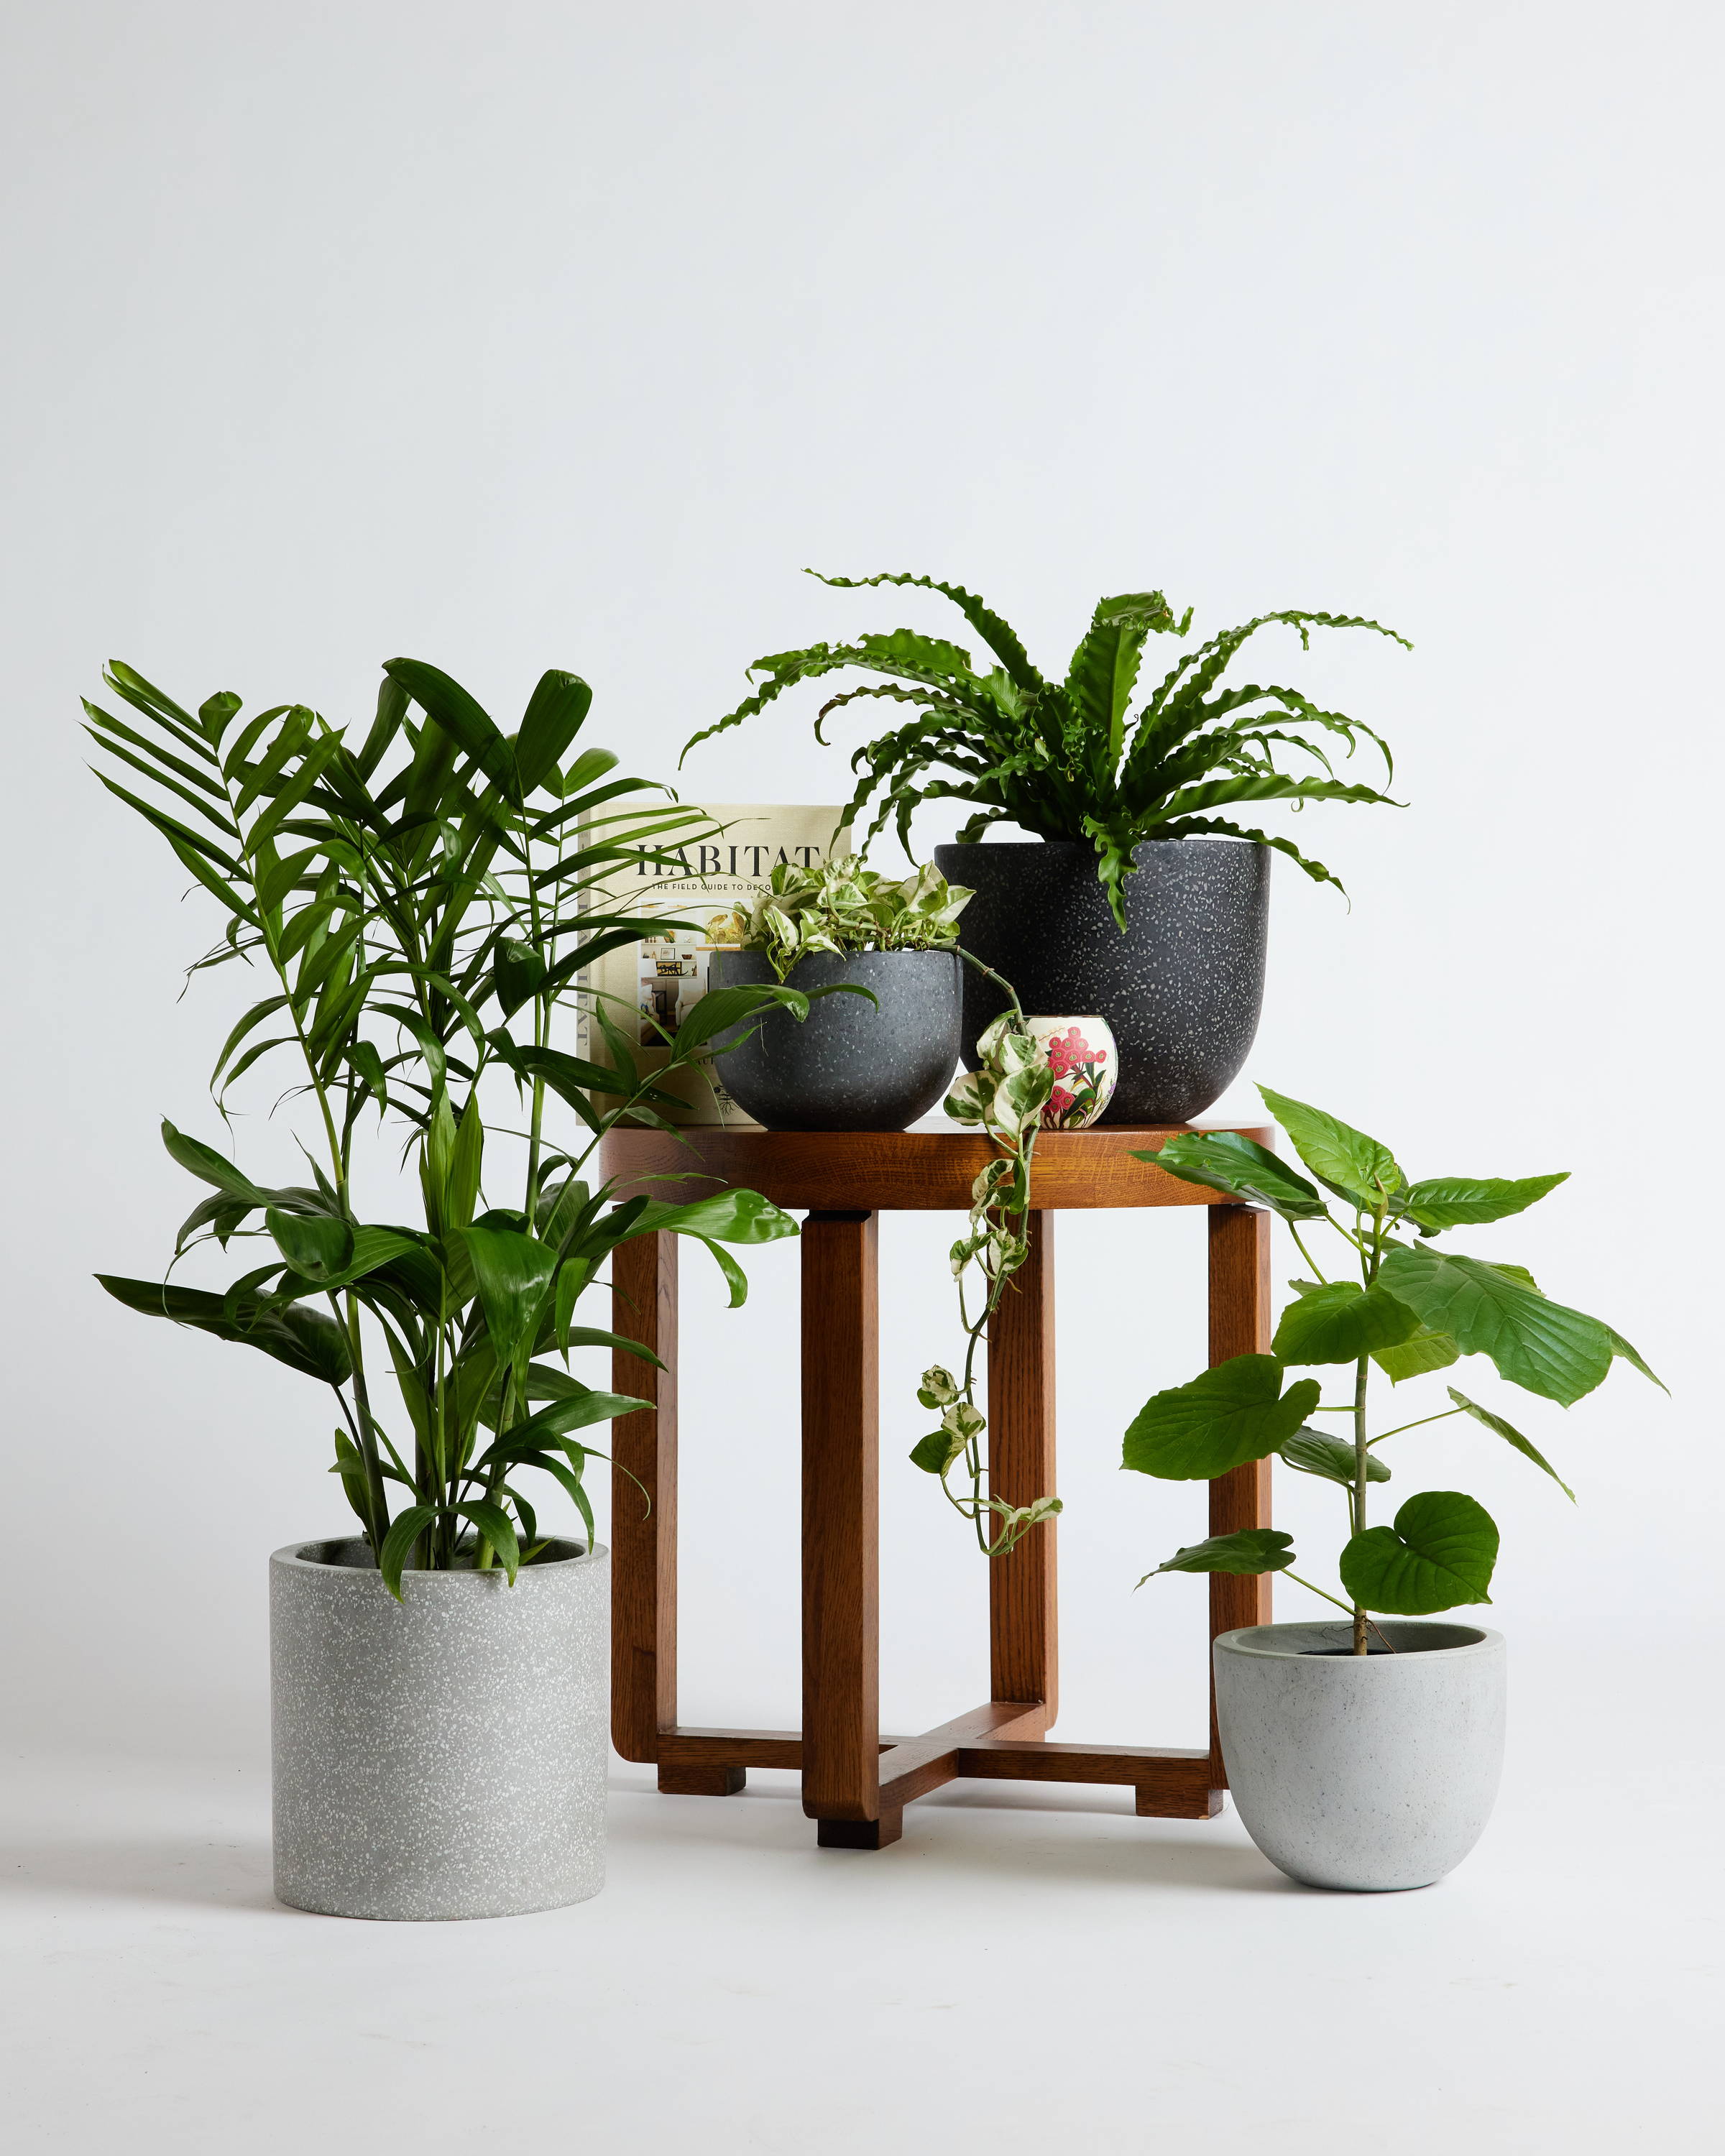 Group of Indoor Plants Together on table with accessories